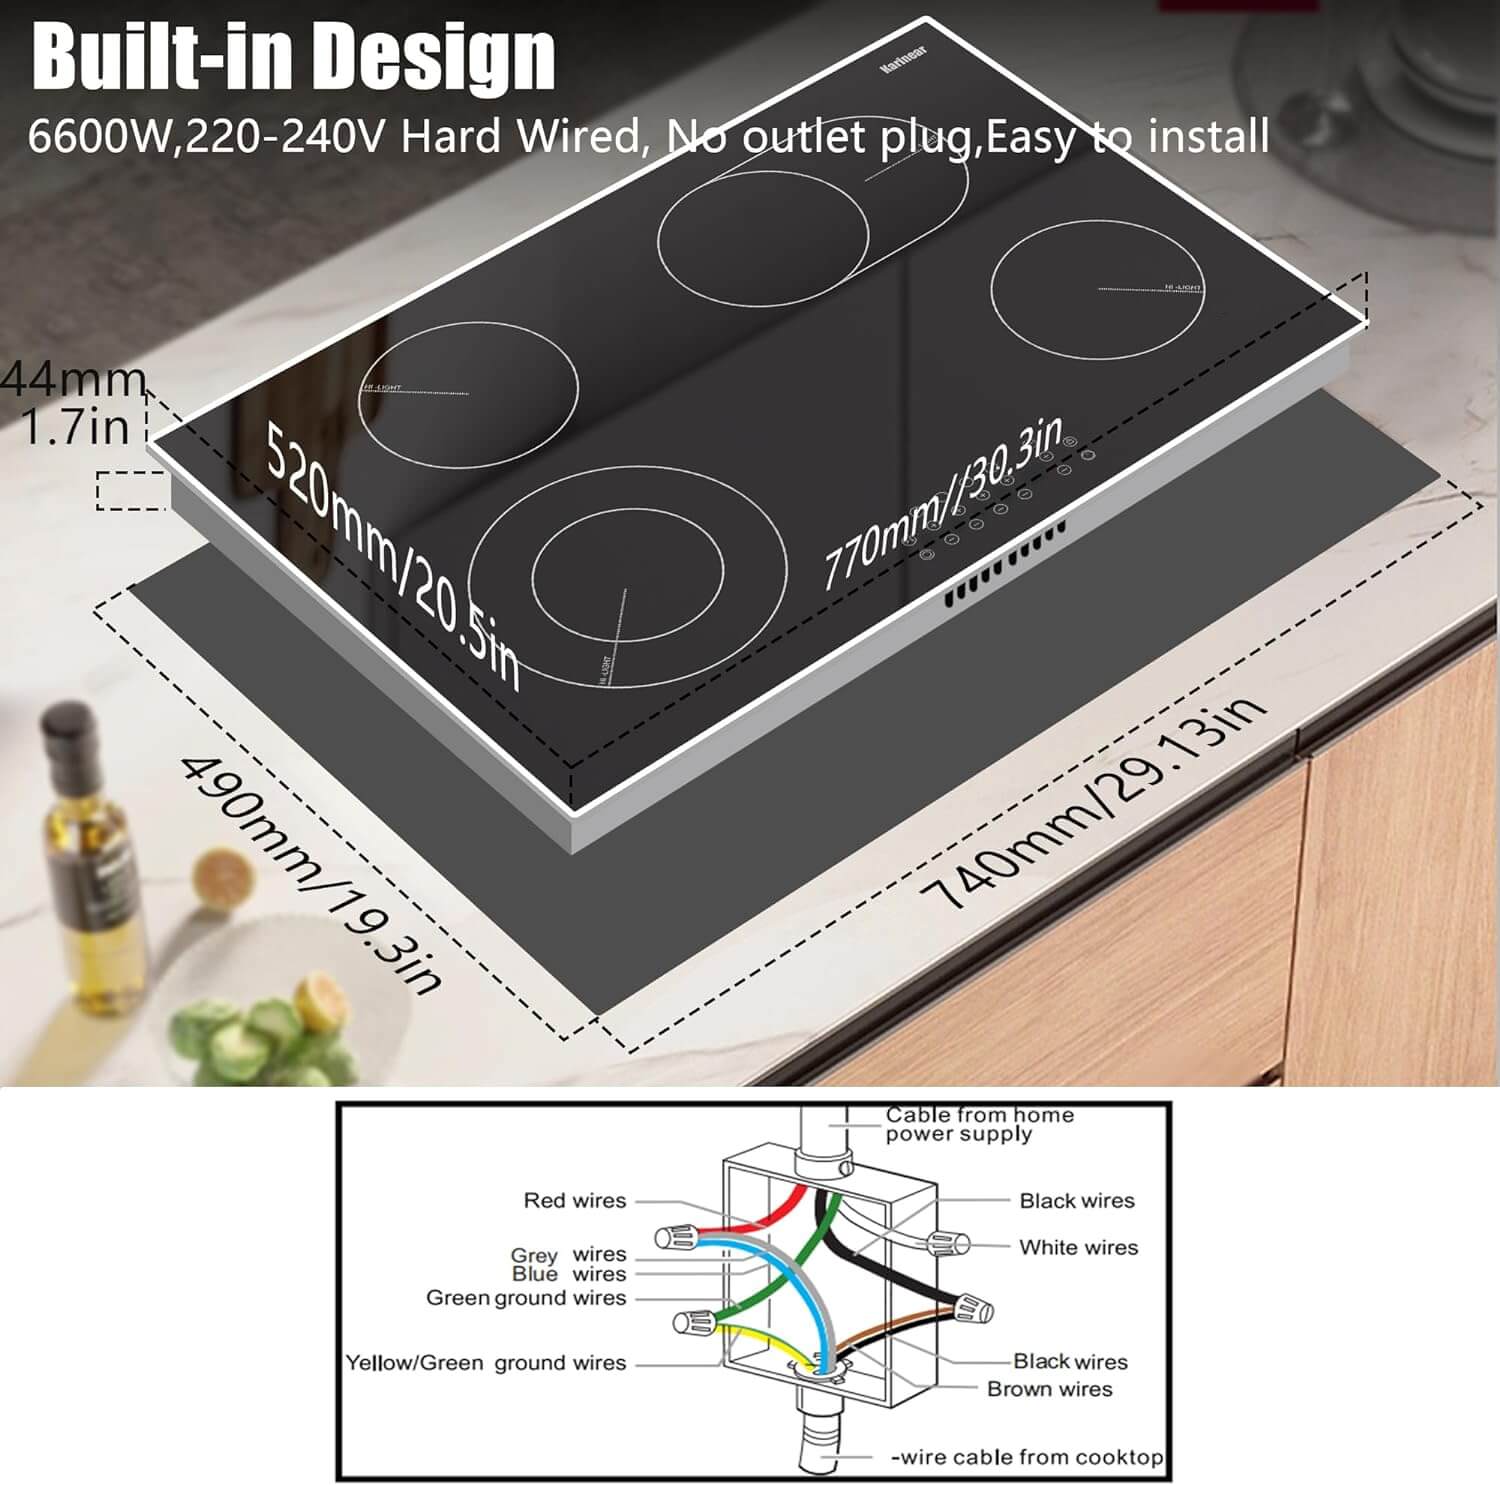 Karinear Electric Cooktop 30 Inch, 4 Burners 7100W Built-in Radiant Electric Stove Top, Ceramic Cooktop with Glass Protection Metal Frame, Kid Safety Lock, Timer, Pause,220-240v Hard Wire, No Plug